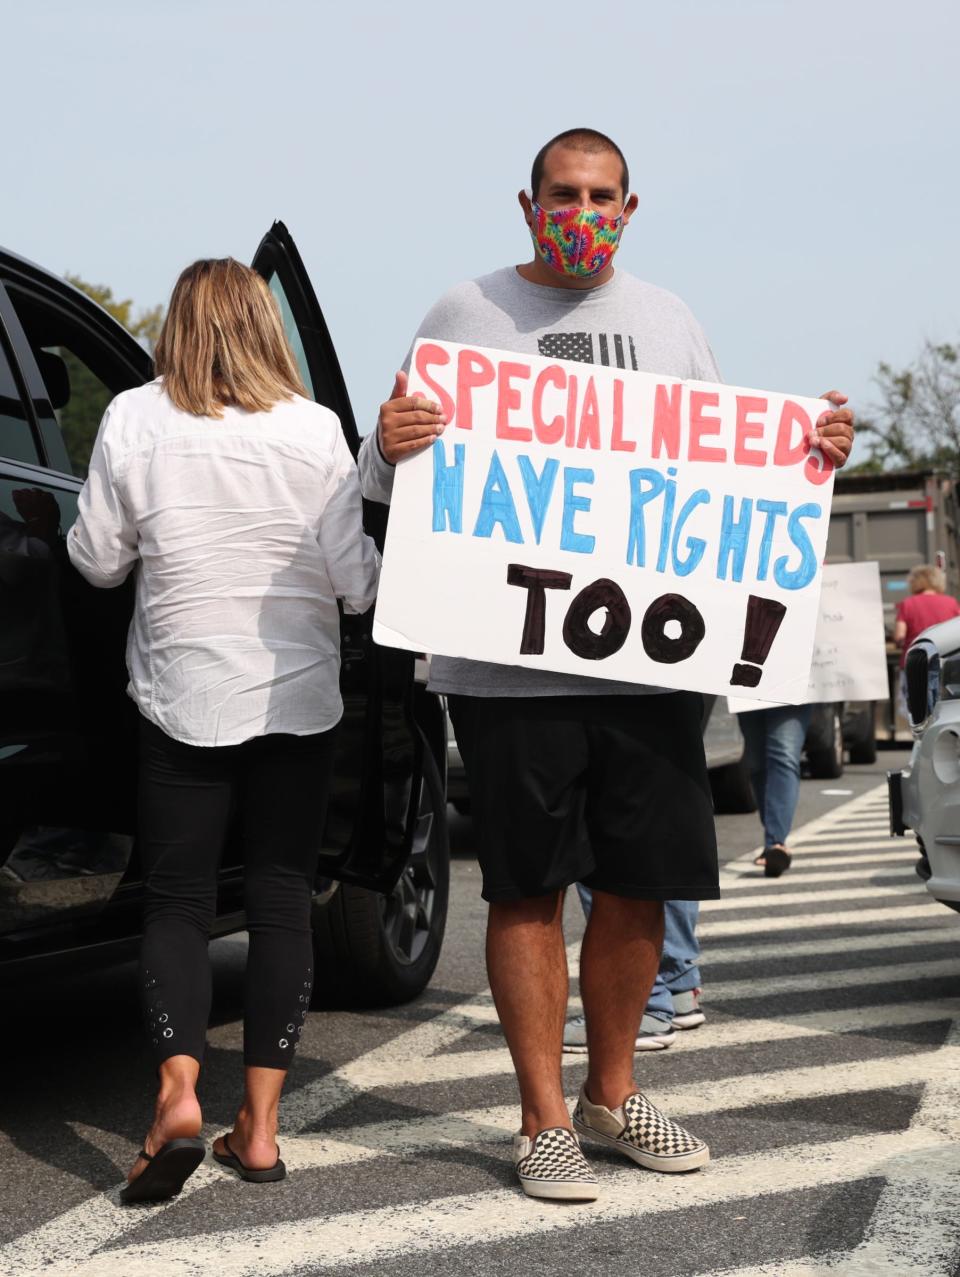 Nicholas Bonasera, 27, from Amity Harbor holds a sign as families from around the state gather for a caravan at the NYS Thruway rest area in Ardsley on Thursday, September 17, 2020, to protest the fiscal shape of group homes which face further state aid cuts to their funding.